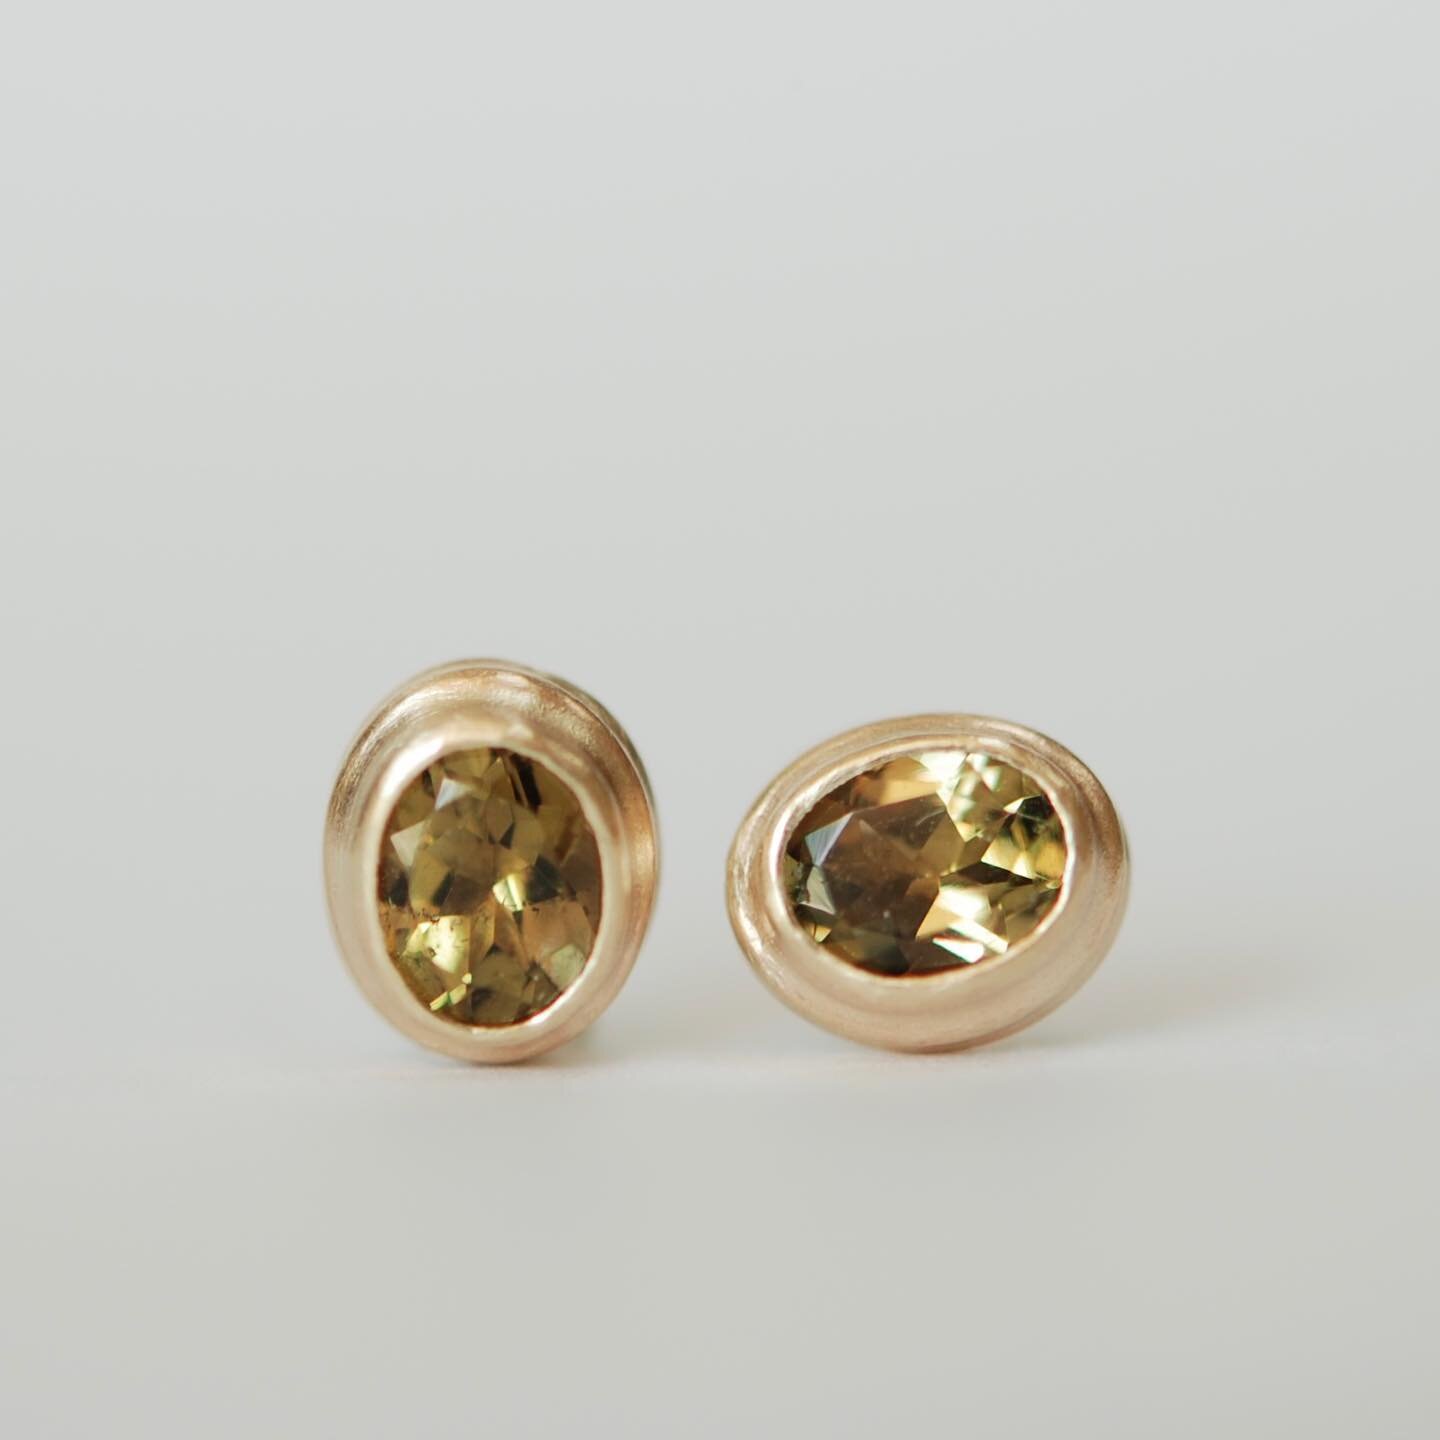 Olive tourmaline studs and other fresh-off-the-bench pieces available at beautiful new retail partner @lencollective ✨ in San Luis Obispo, California!